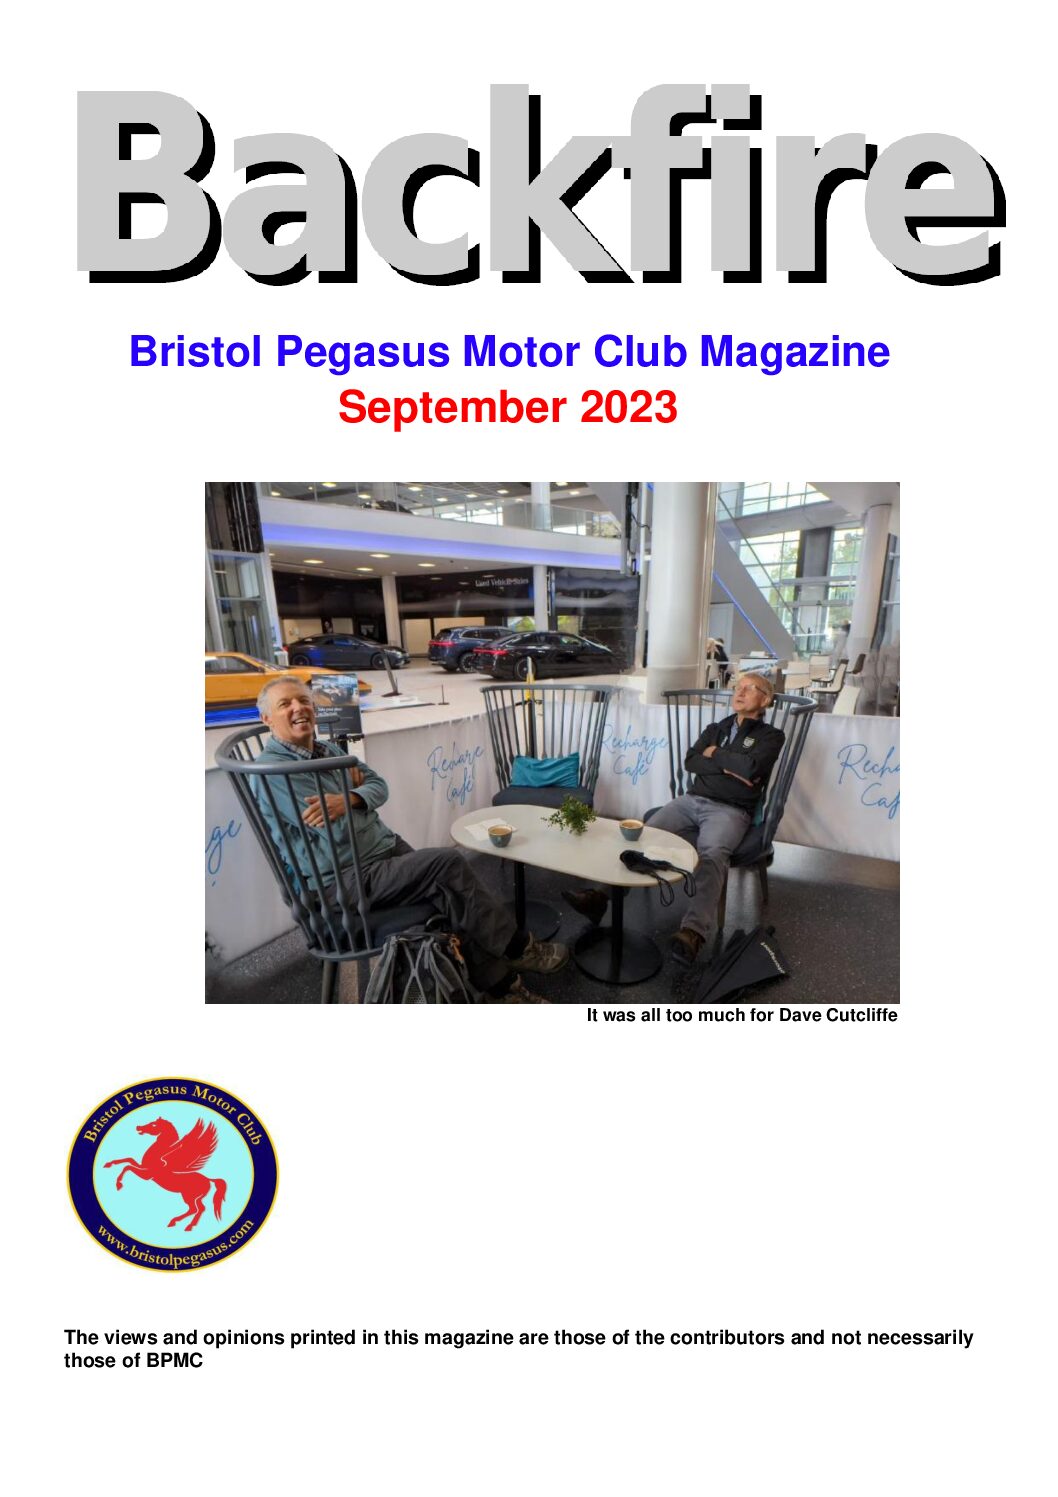 Front cover of September 2023 Issue